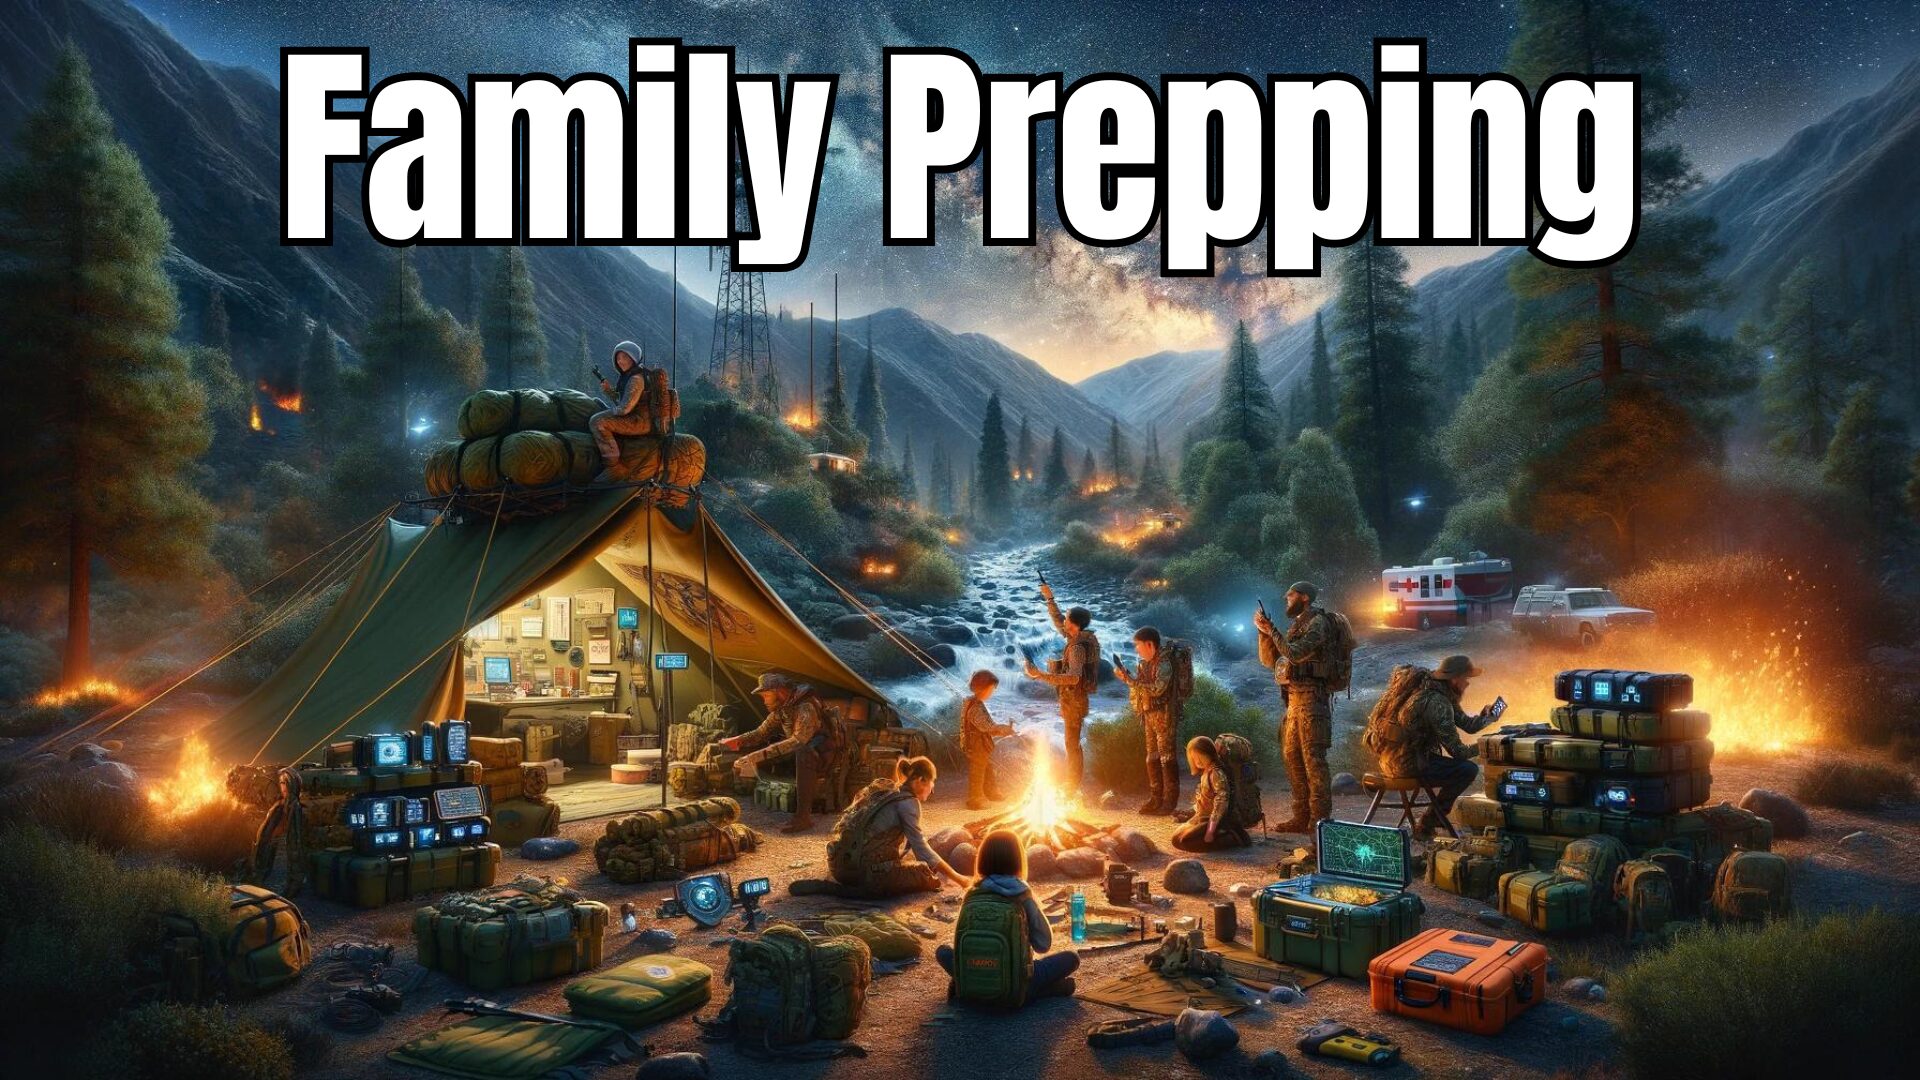 Family Prepping